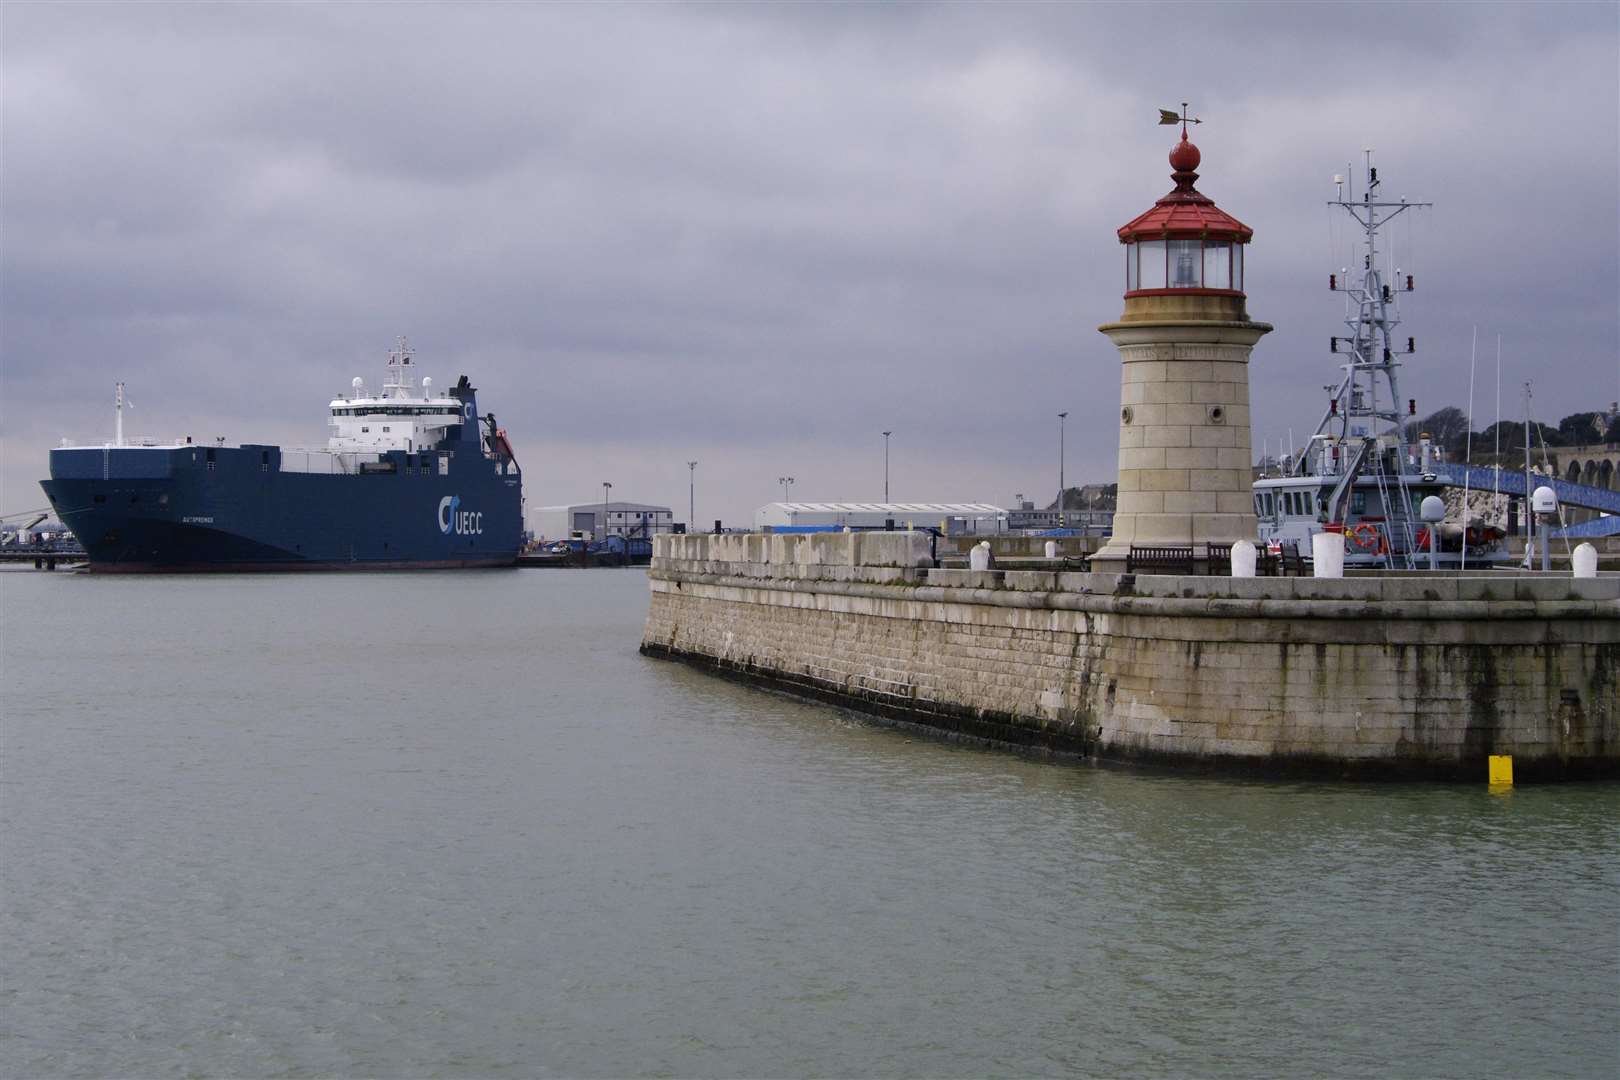 The Port of Ramsgate is no longer open to ferries after Thanet council agreed to downgrade its funding